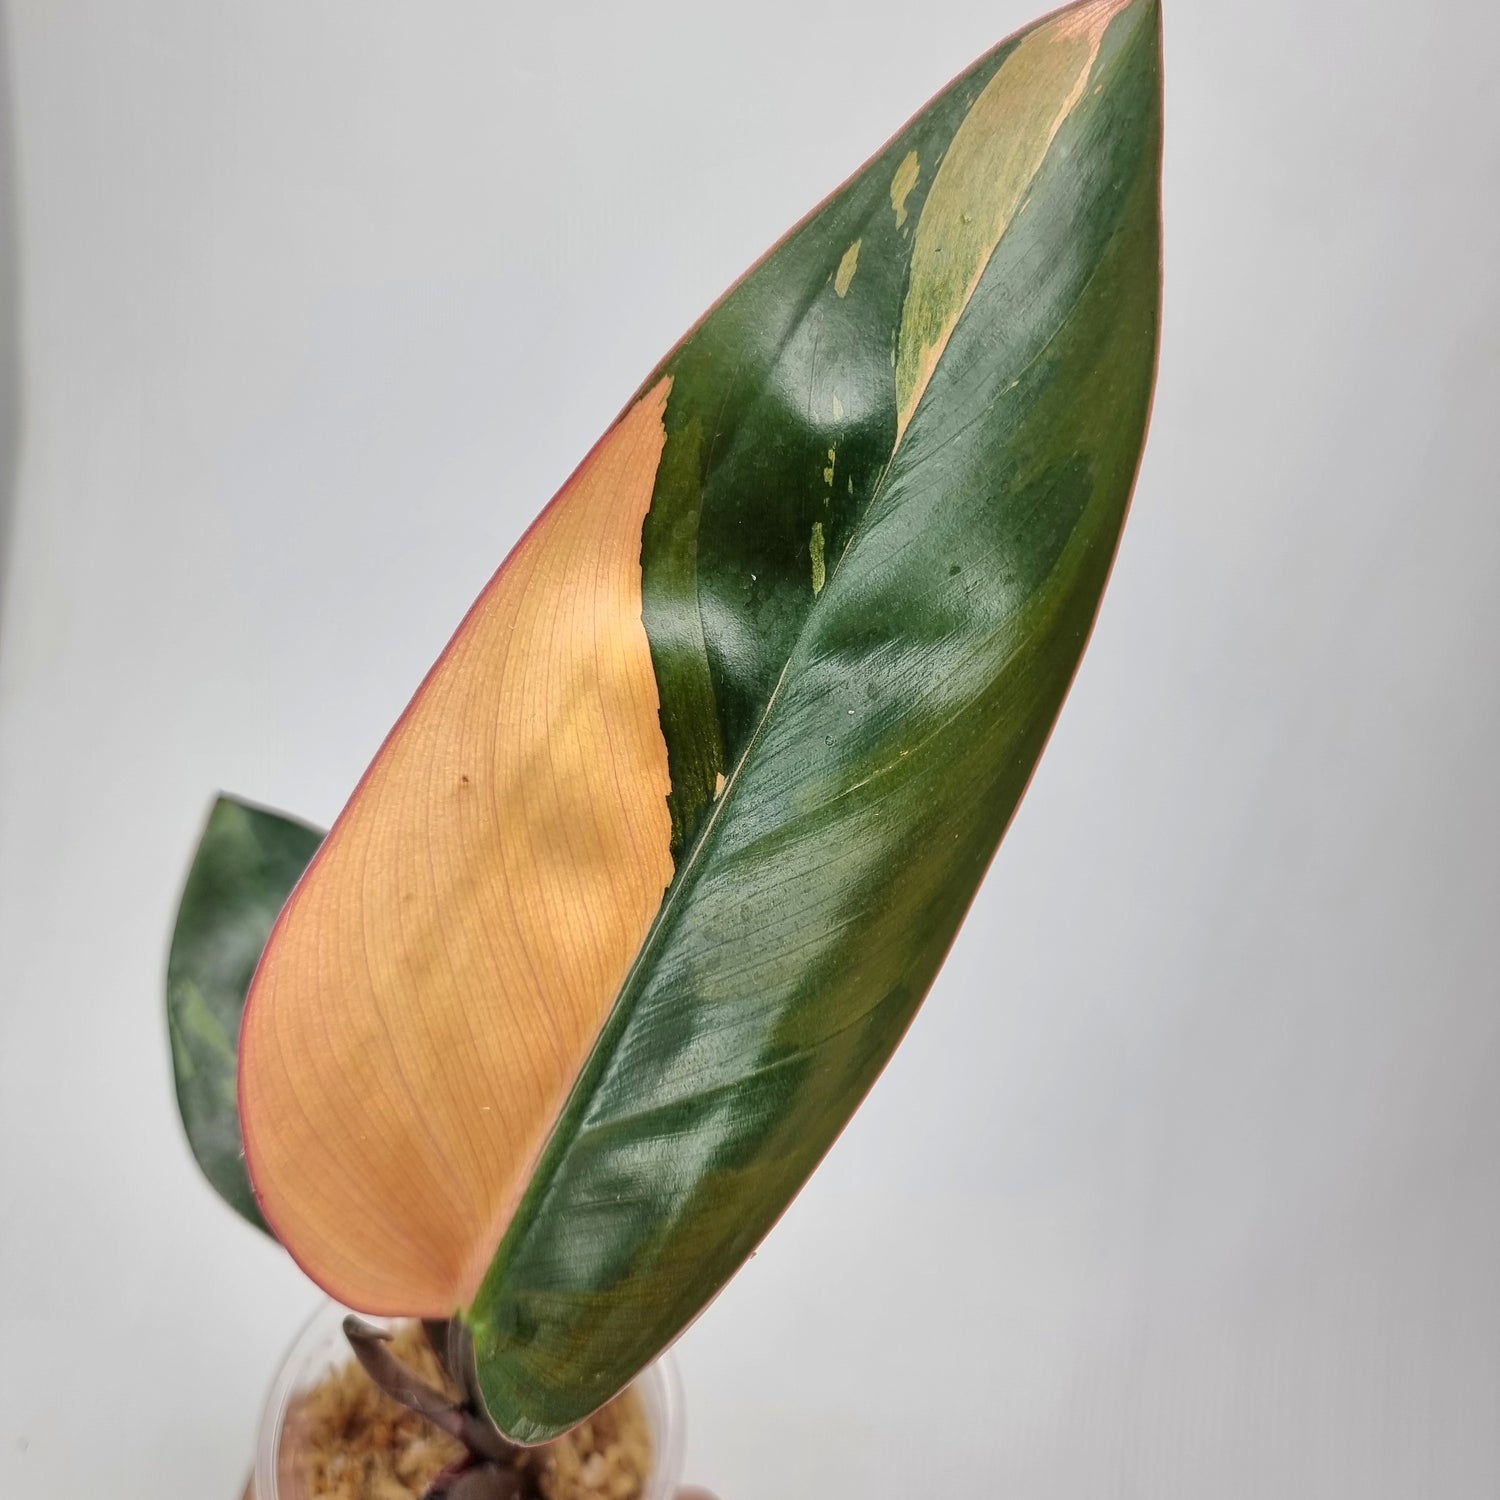 rare Philodendron Red congo variegated for sale in Perth Australia